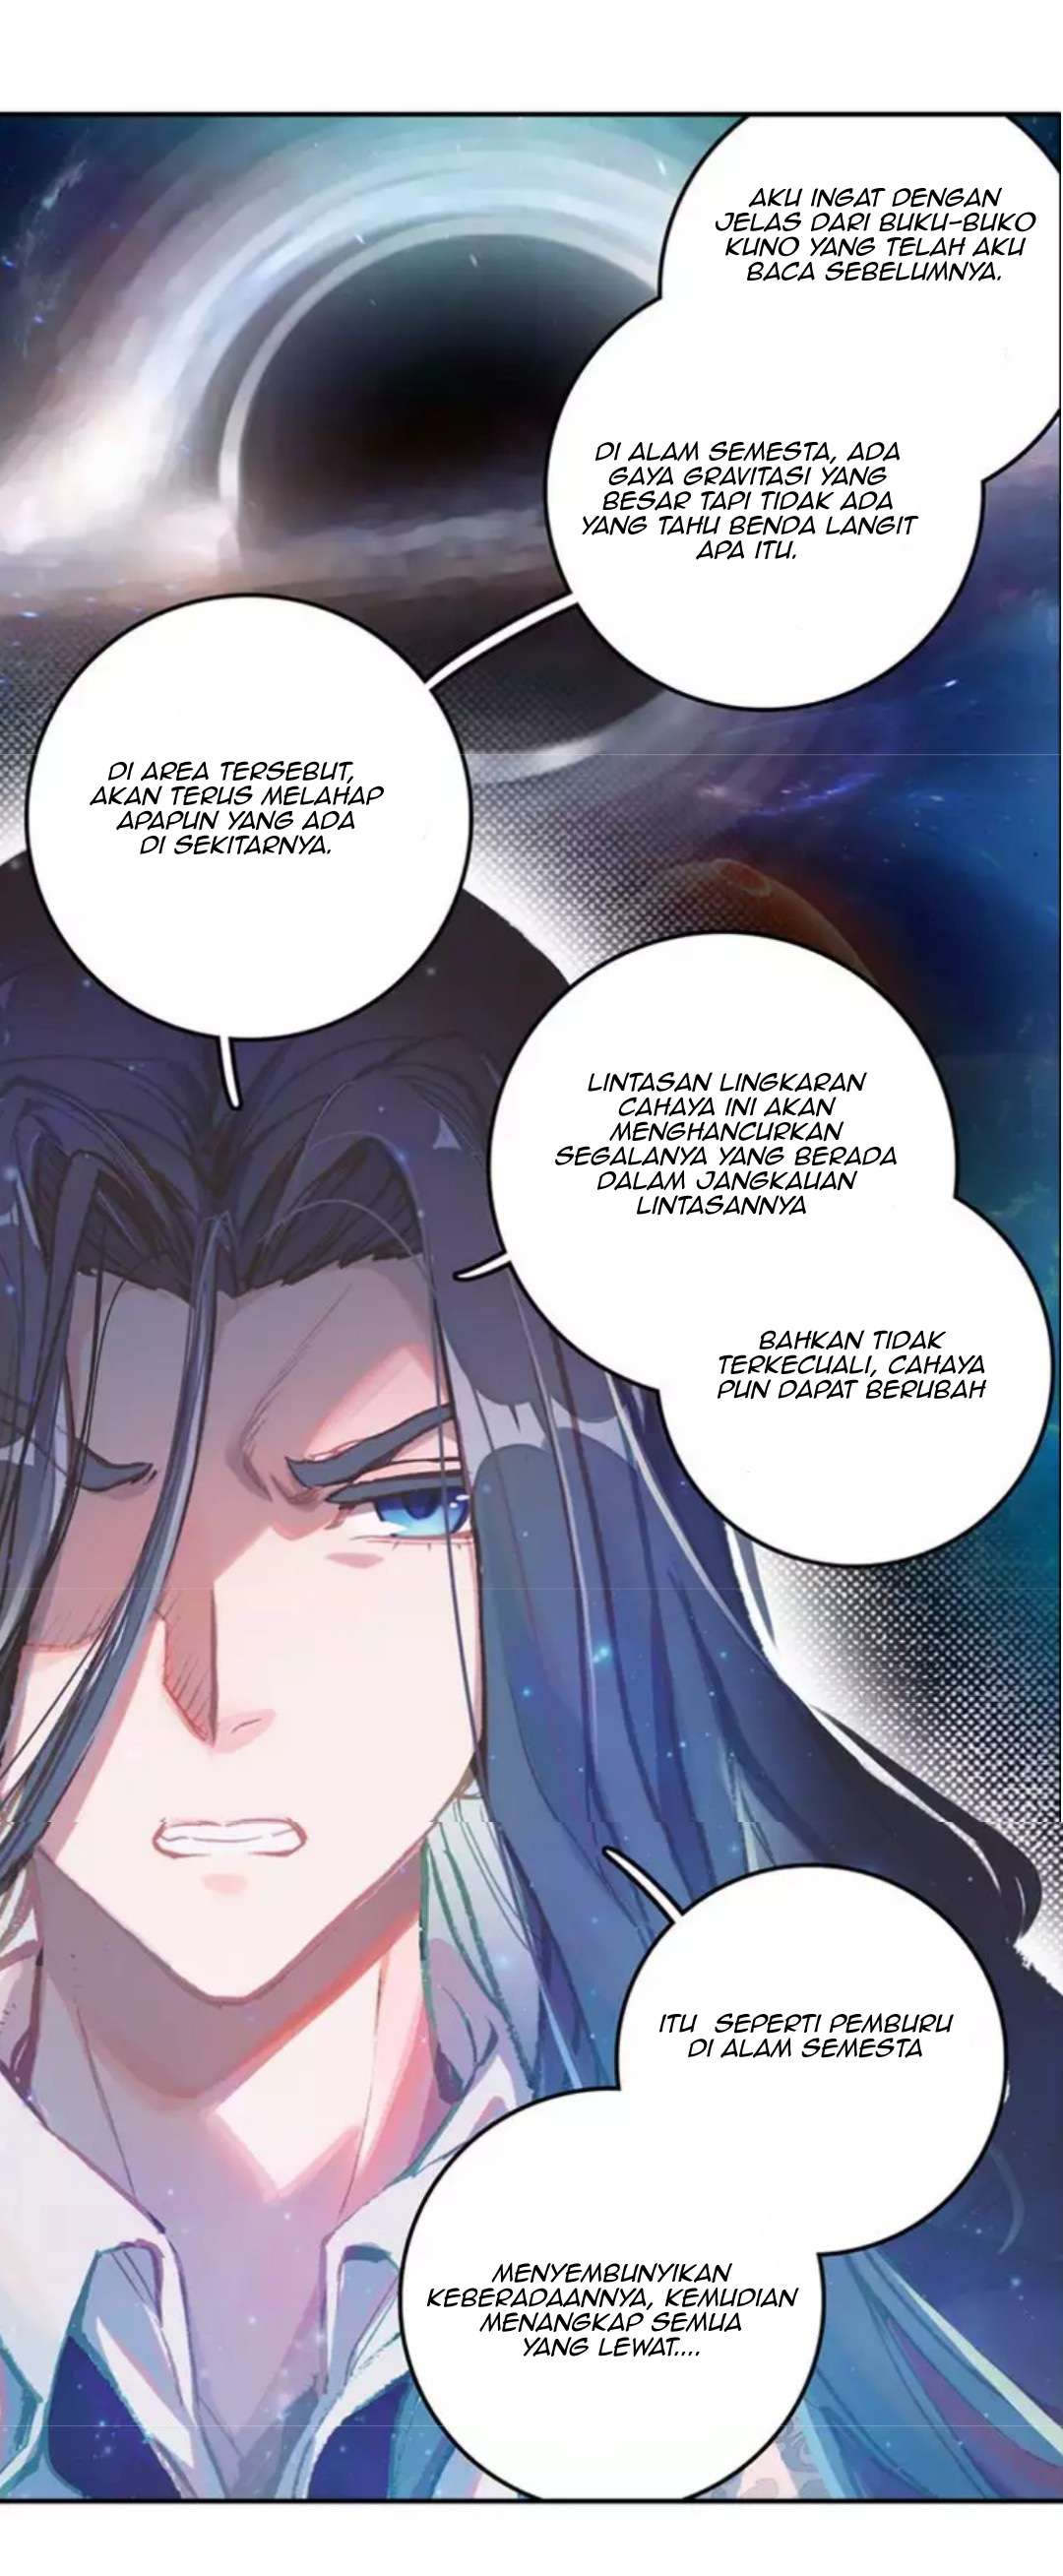 Soul Land Legend of the Tang’s Hero Chapter 02 32